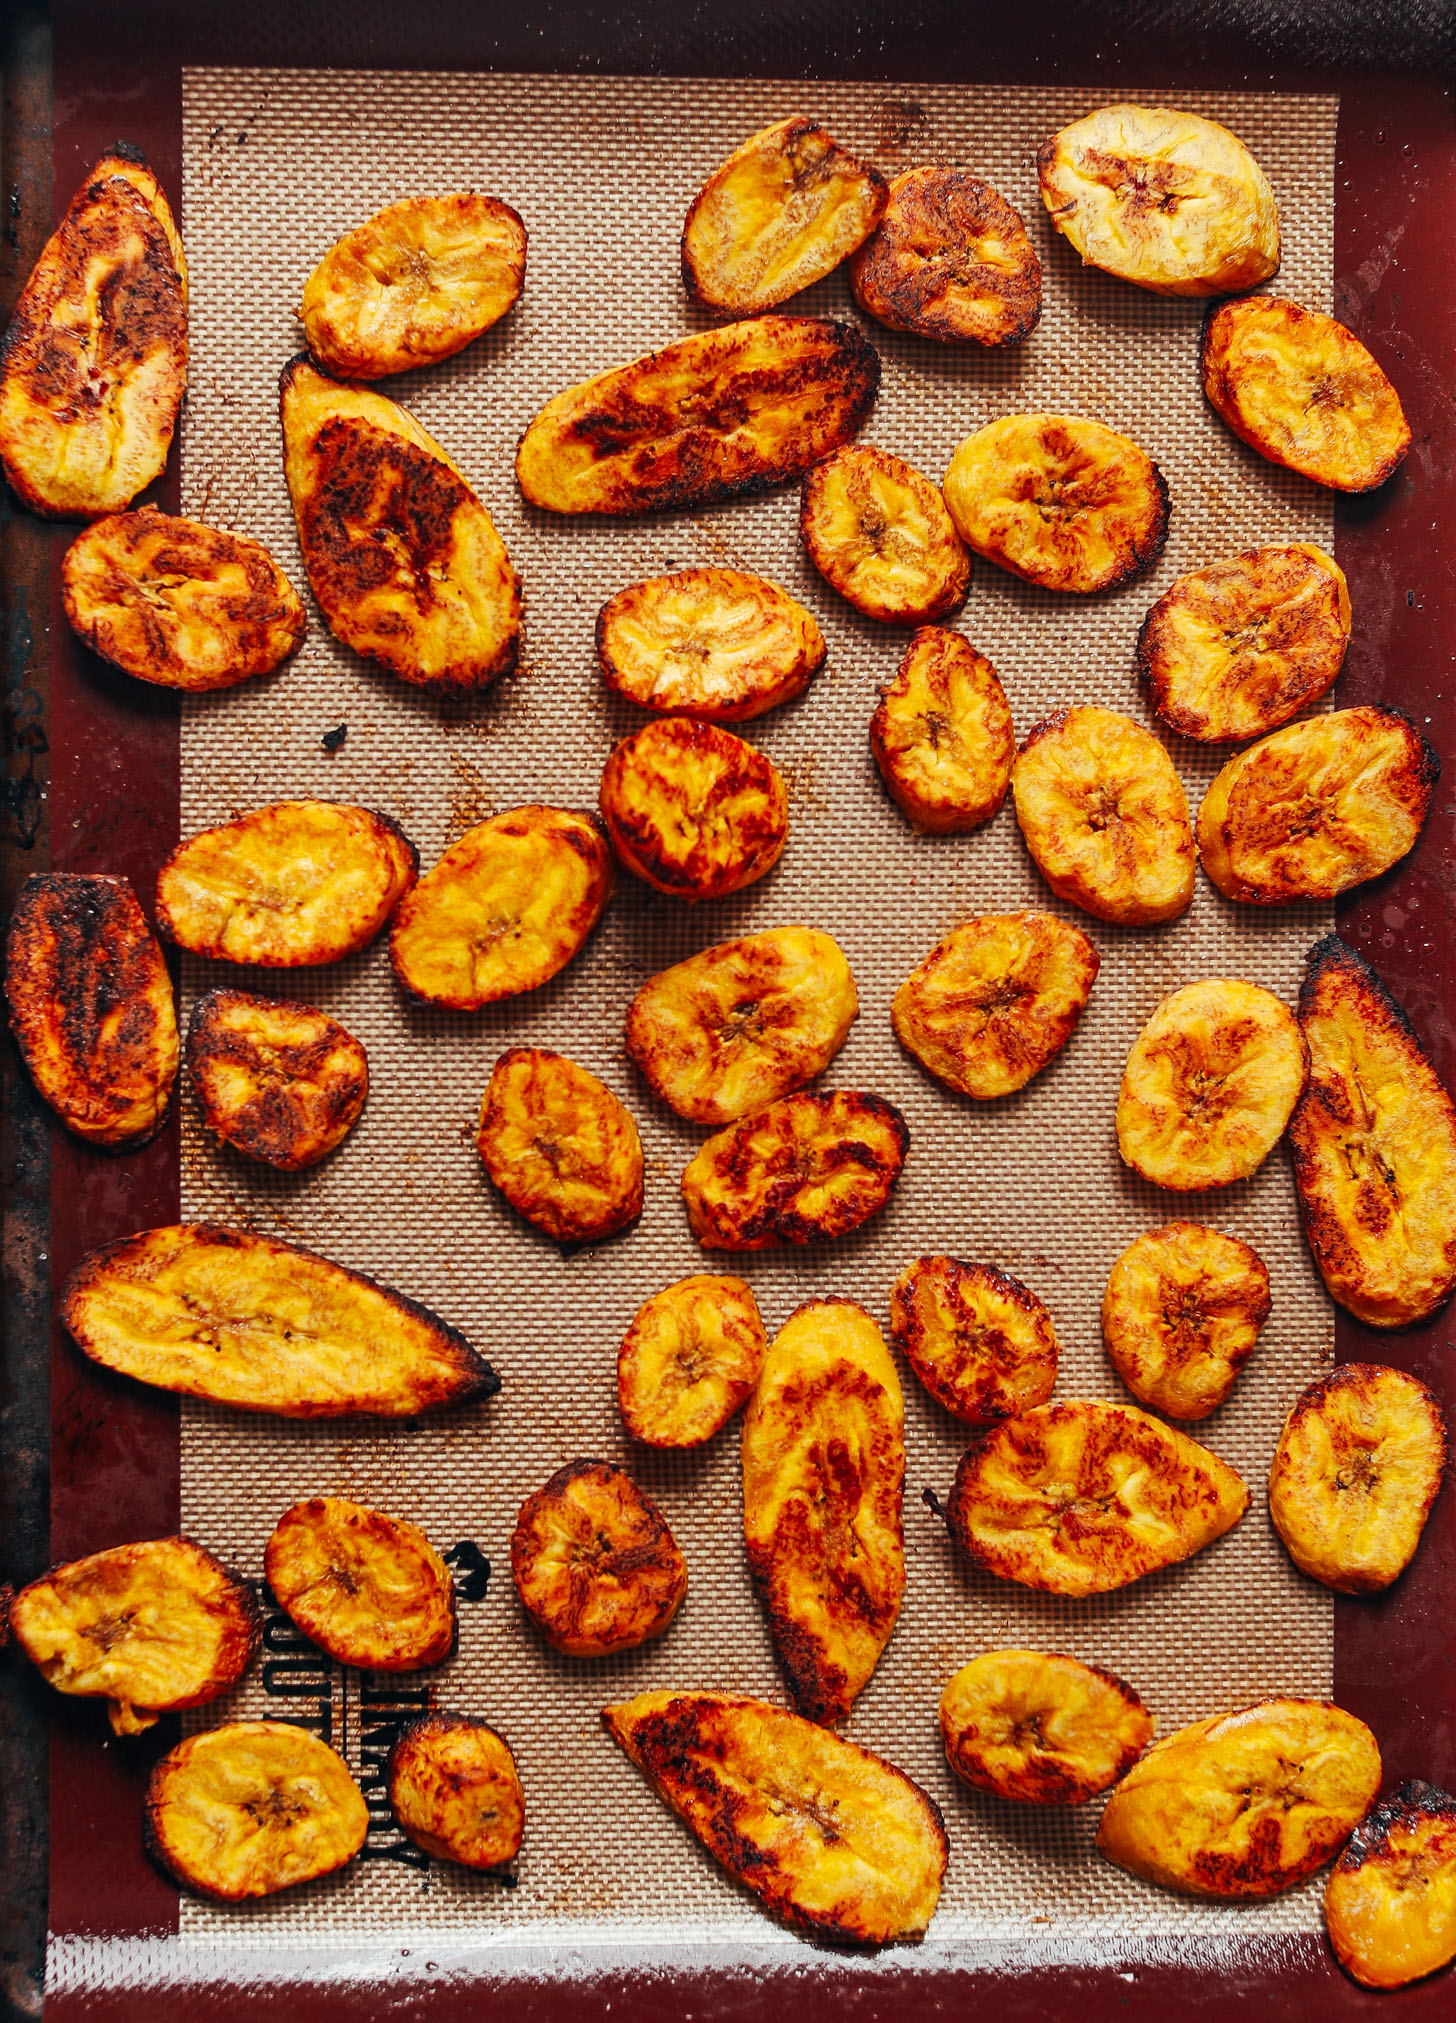 Freshly roasted, perfectly browned plantains on a silicone-lined baking sheet